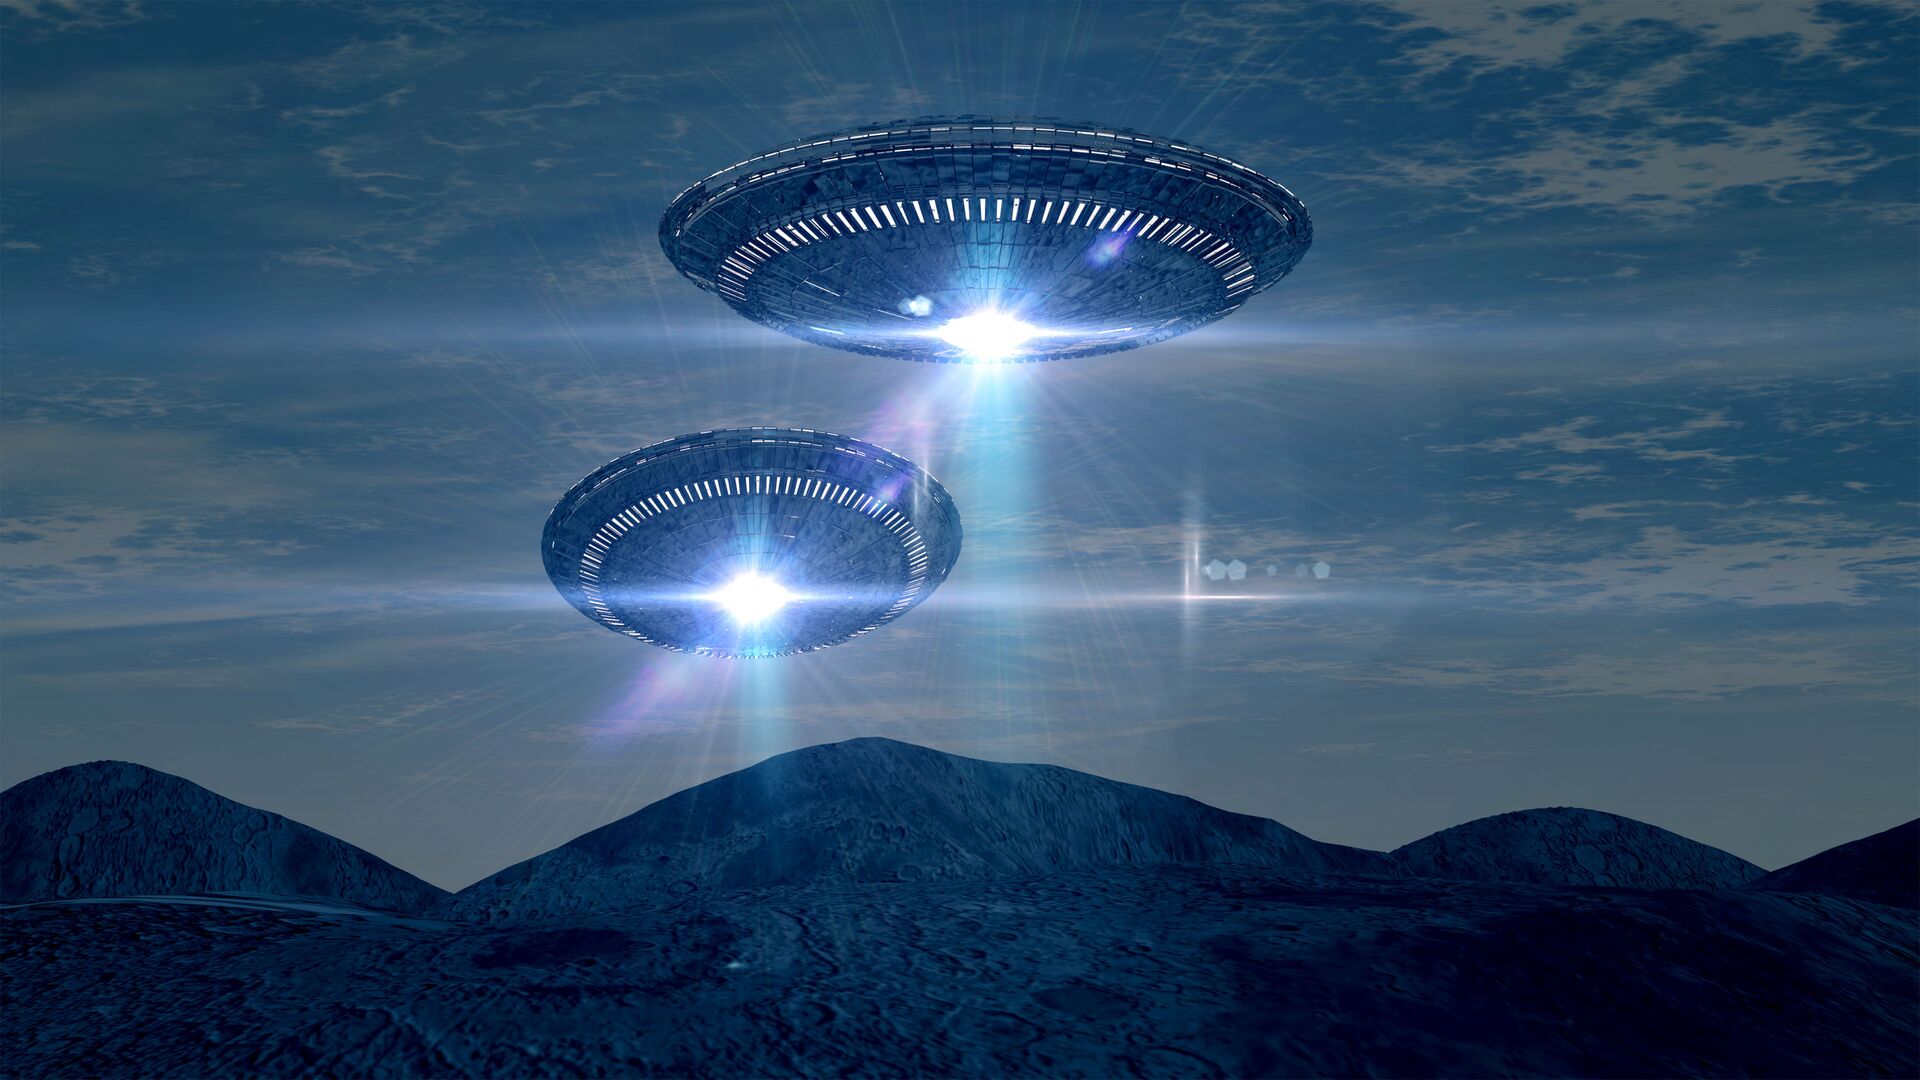 Pentagon has studied 500 UFOs and found no aliens or objects that violate the laws of physics